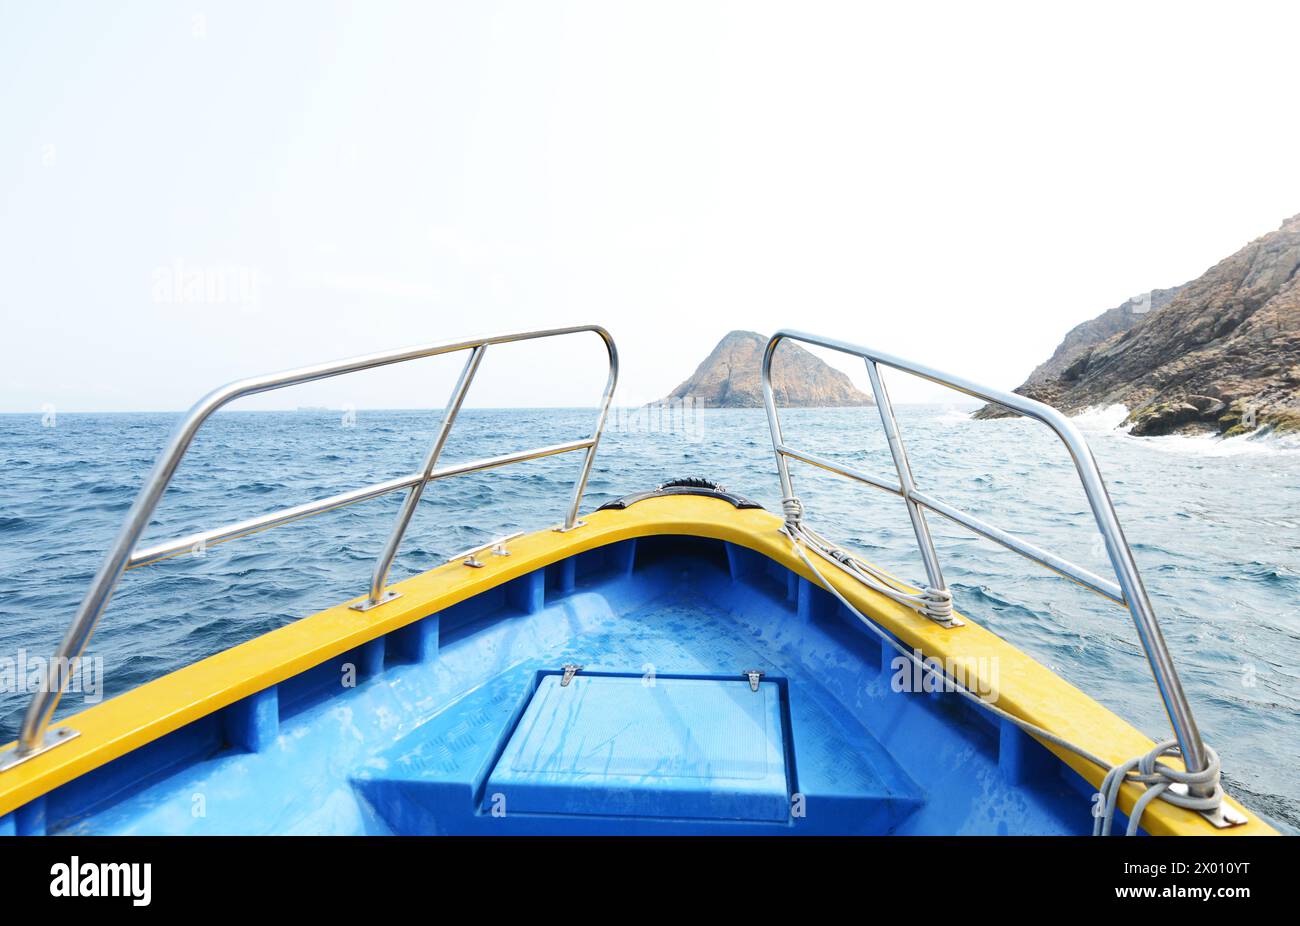 A speedboat trip from Ham Tin Beach to Sai Kung in Hong Kong. Stock Photo